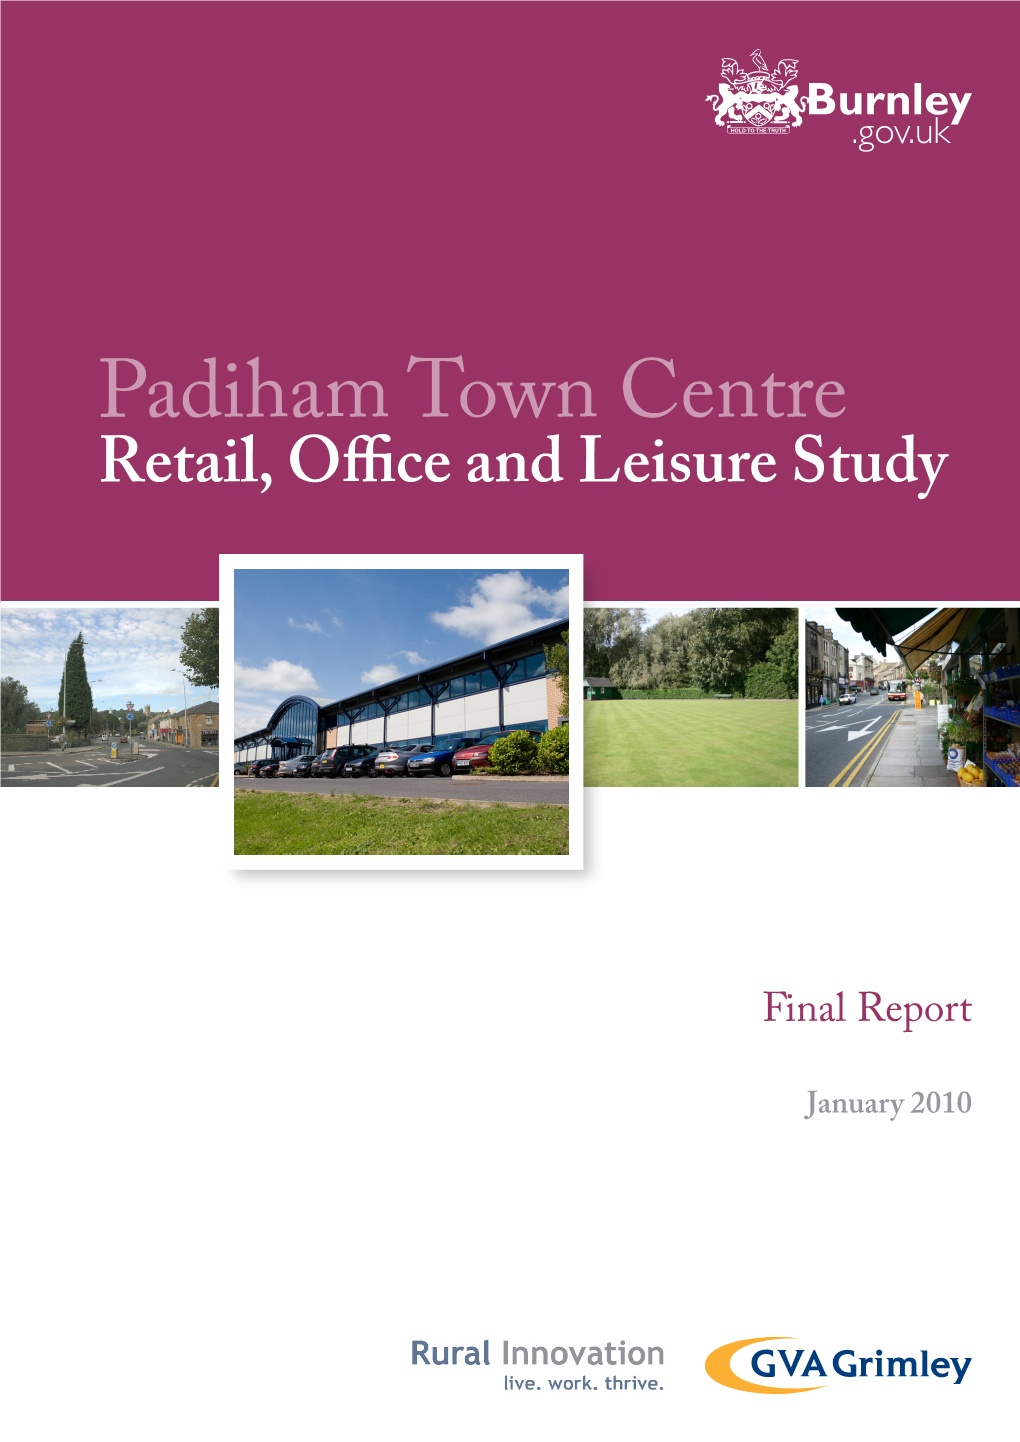 Padiham Town Centre Retail, Office and Leisure Study